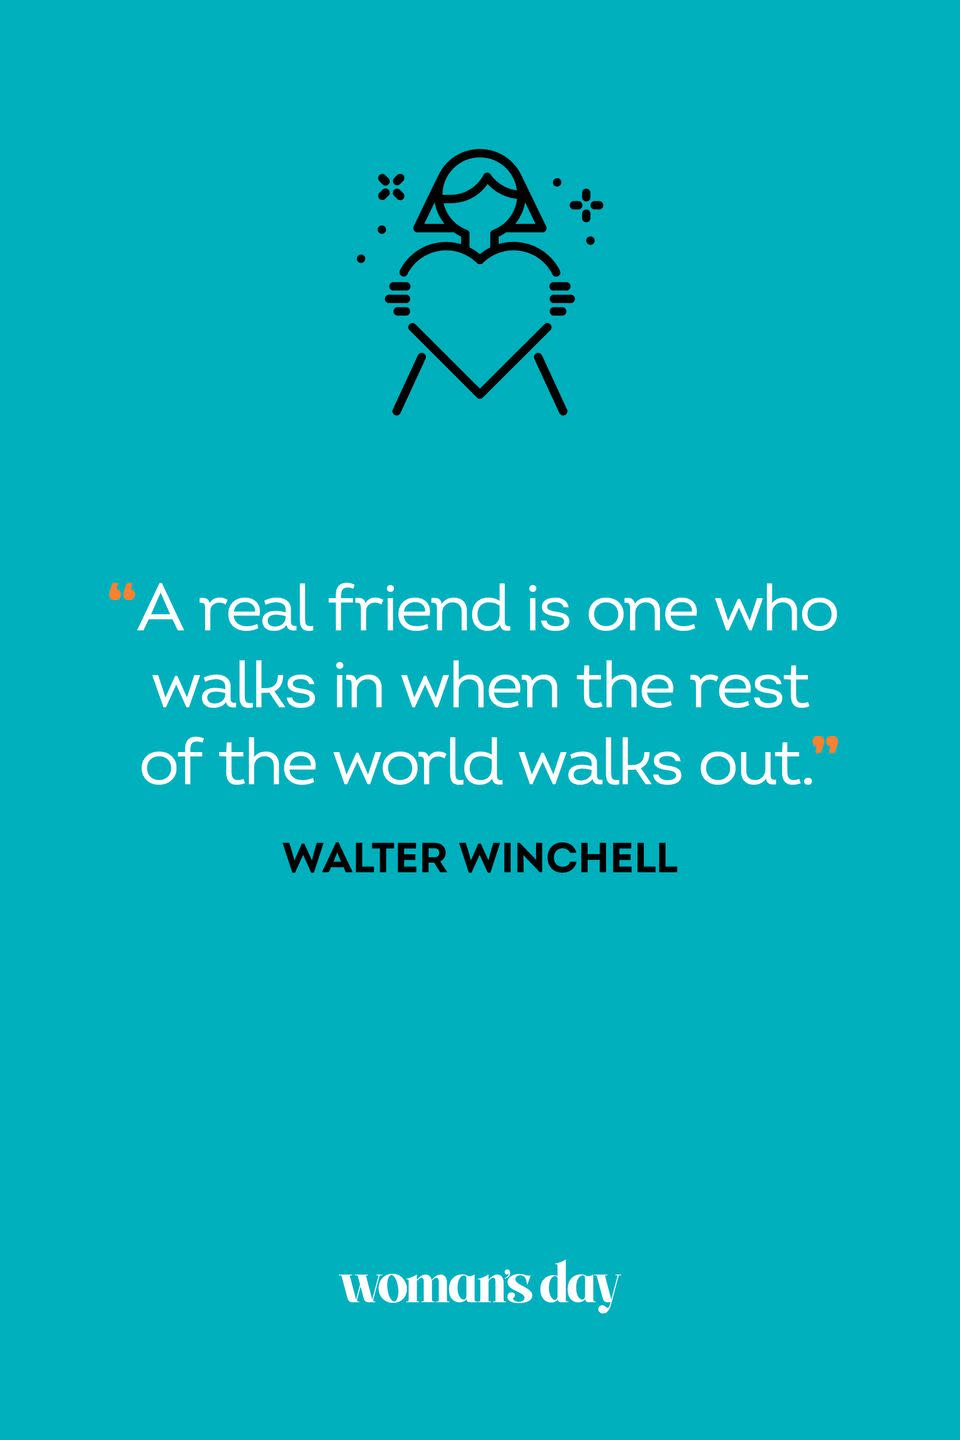 <p>"A real friend is one who walks in when the rest of the world walks out."</p>